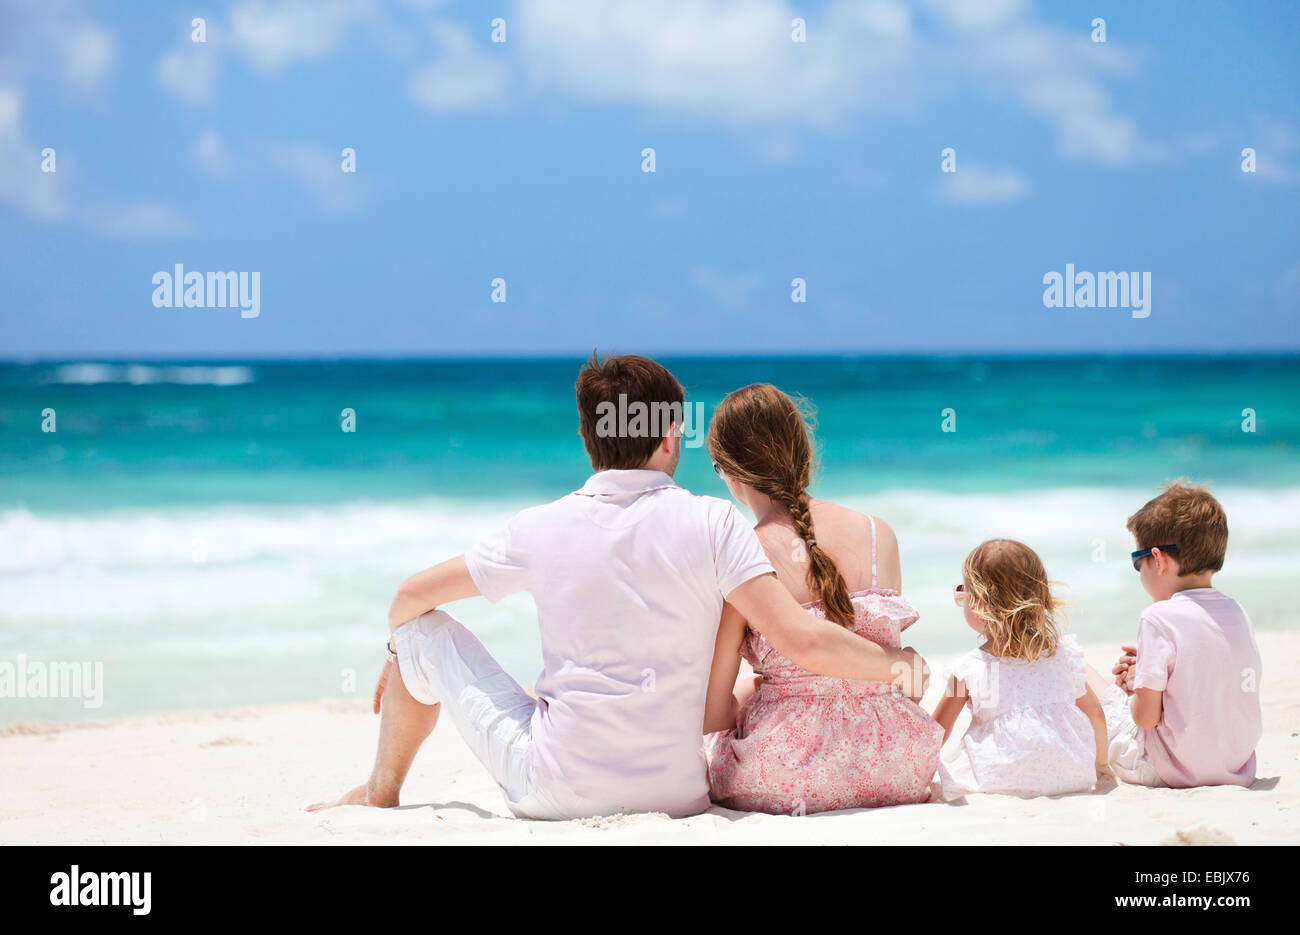 family with two children admiring the view on Caribbean beach, Mexico Stock Photo